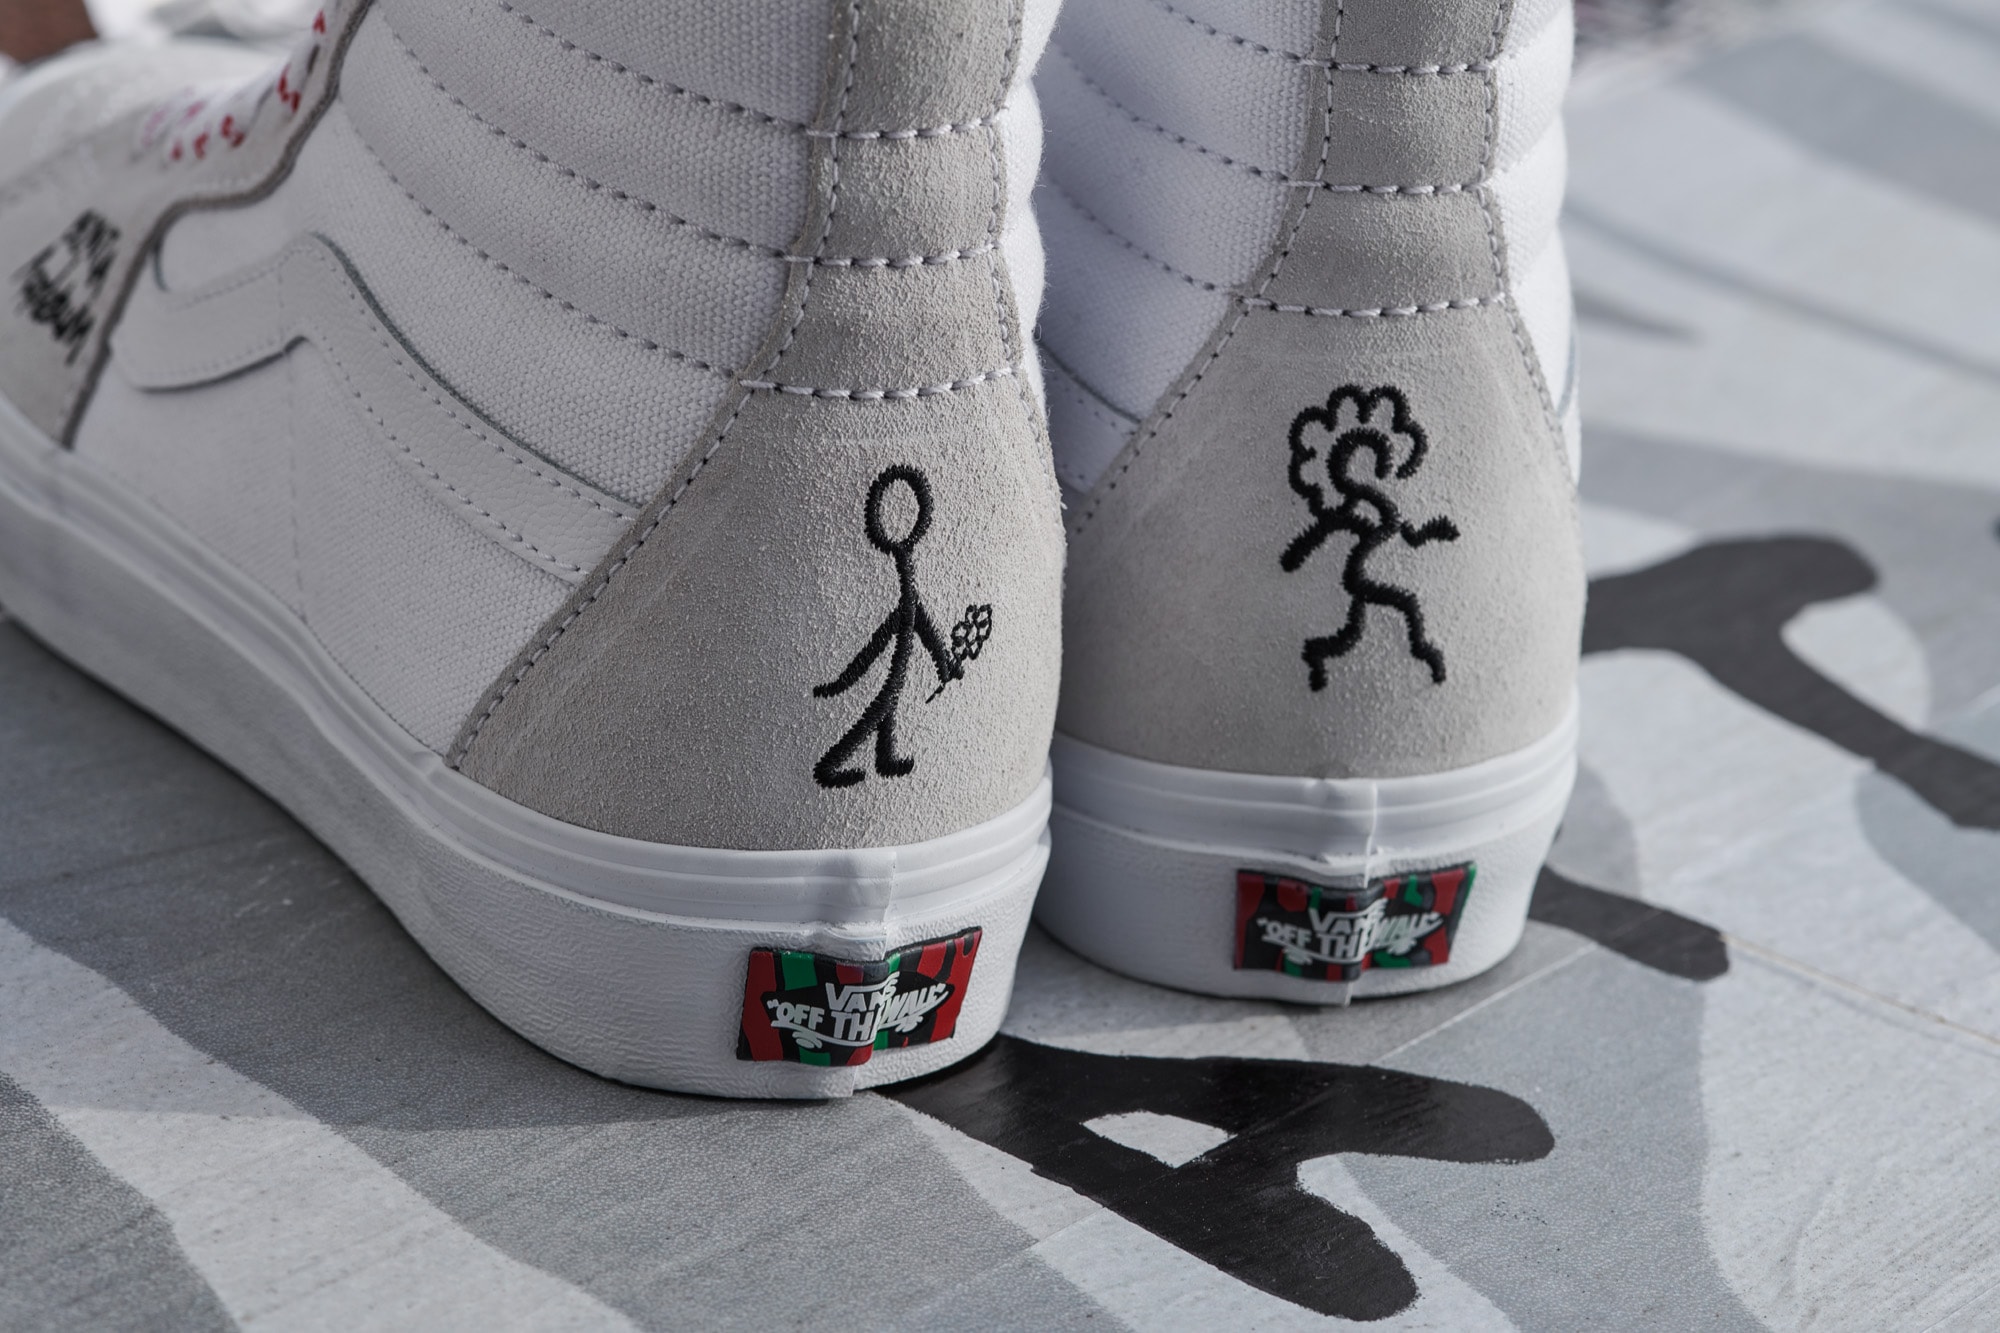 Collaboration Vans & A Tribe Called Quest